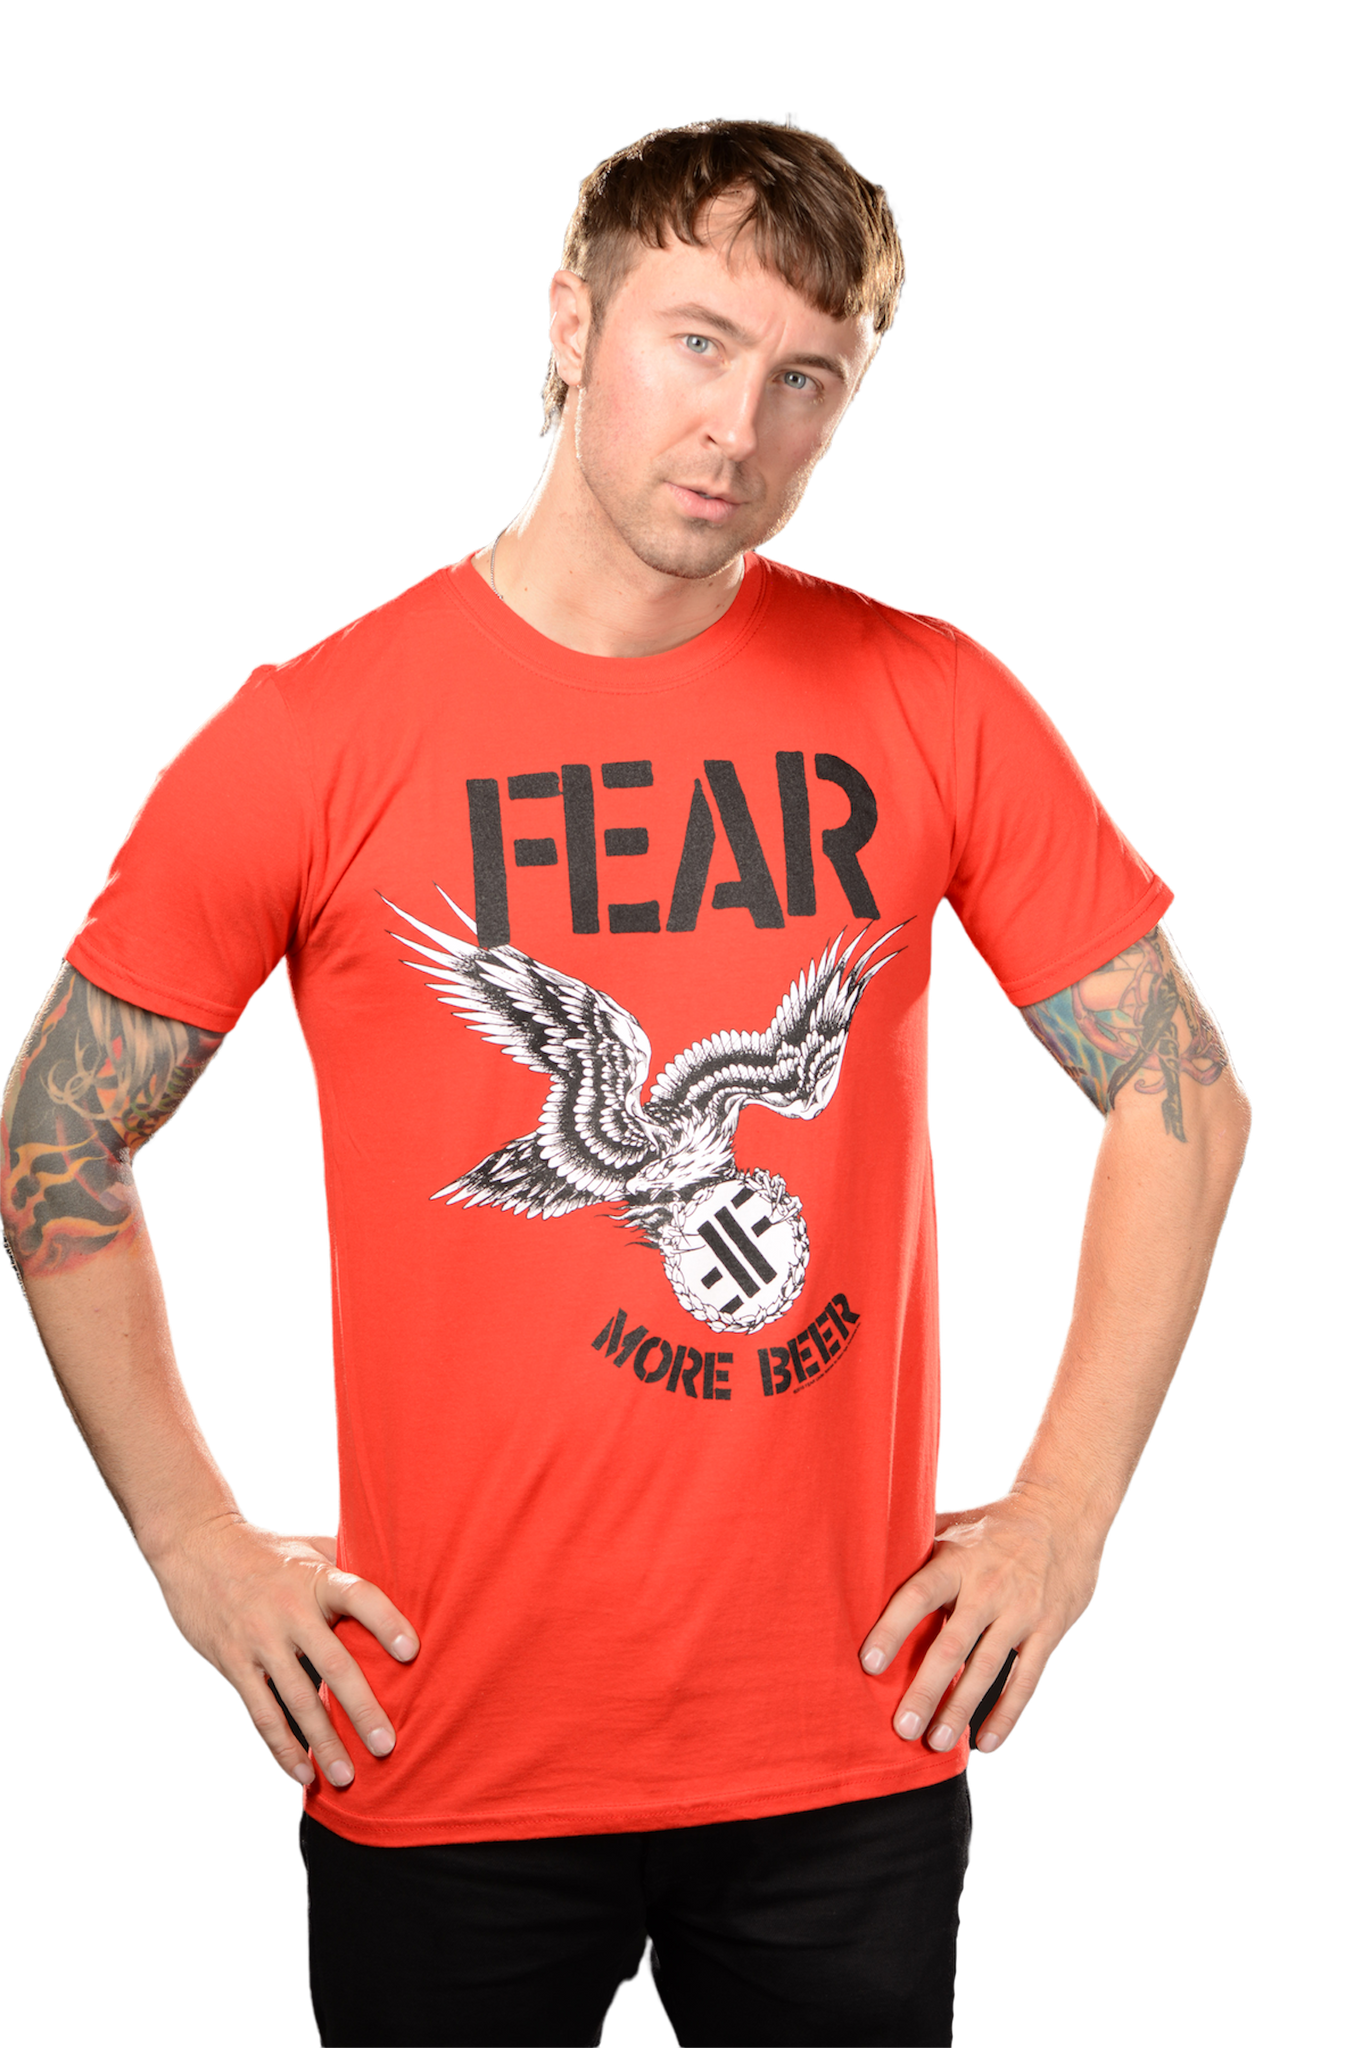 FEAR: "MORE BEER" RED T-SHIRT